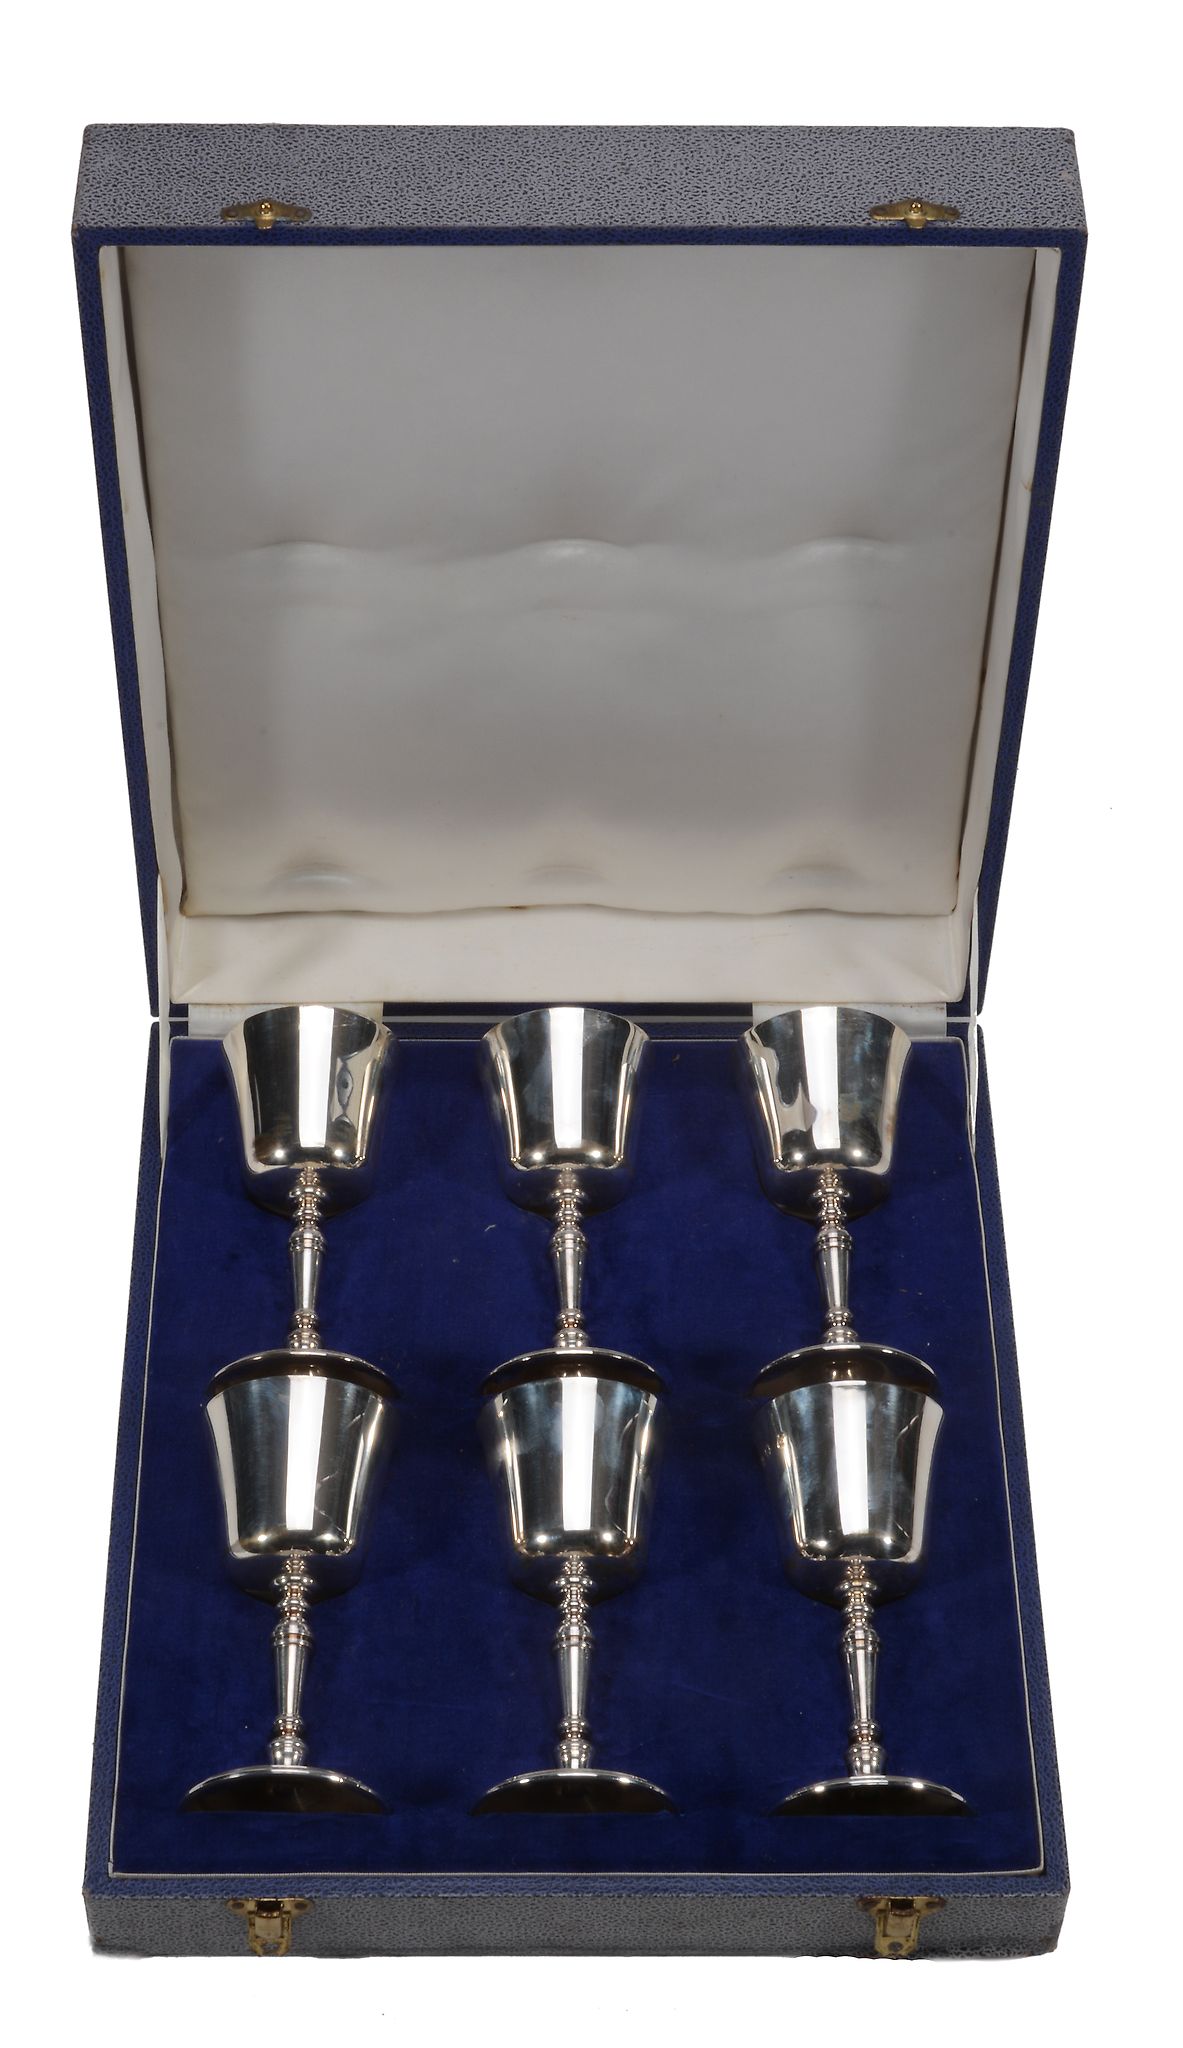 A set of six silver goblets by C. J. Vander, London 1973 (display hallmarks), with slightly flared